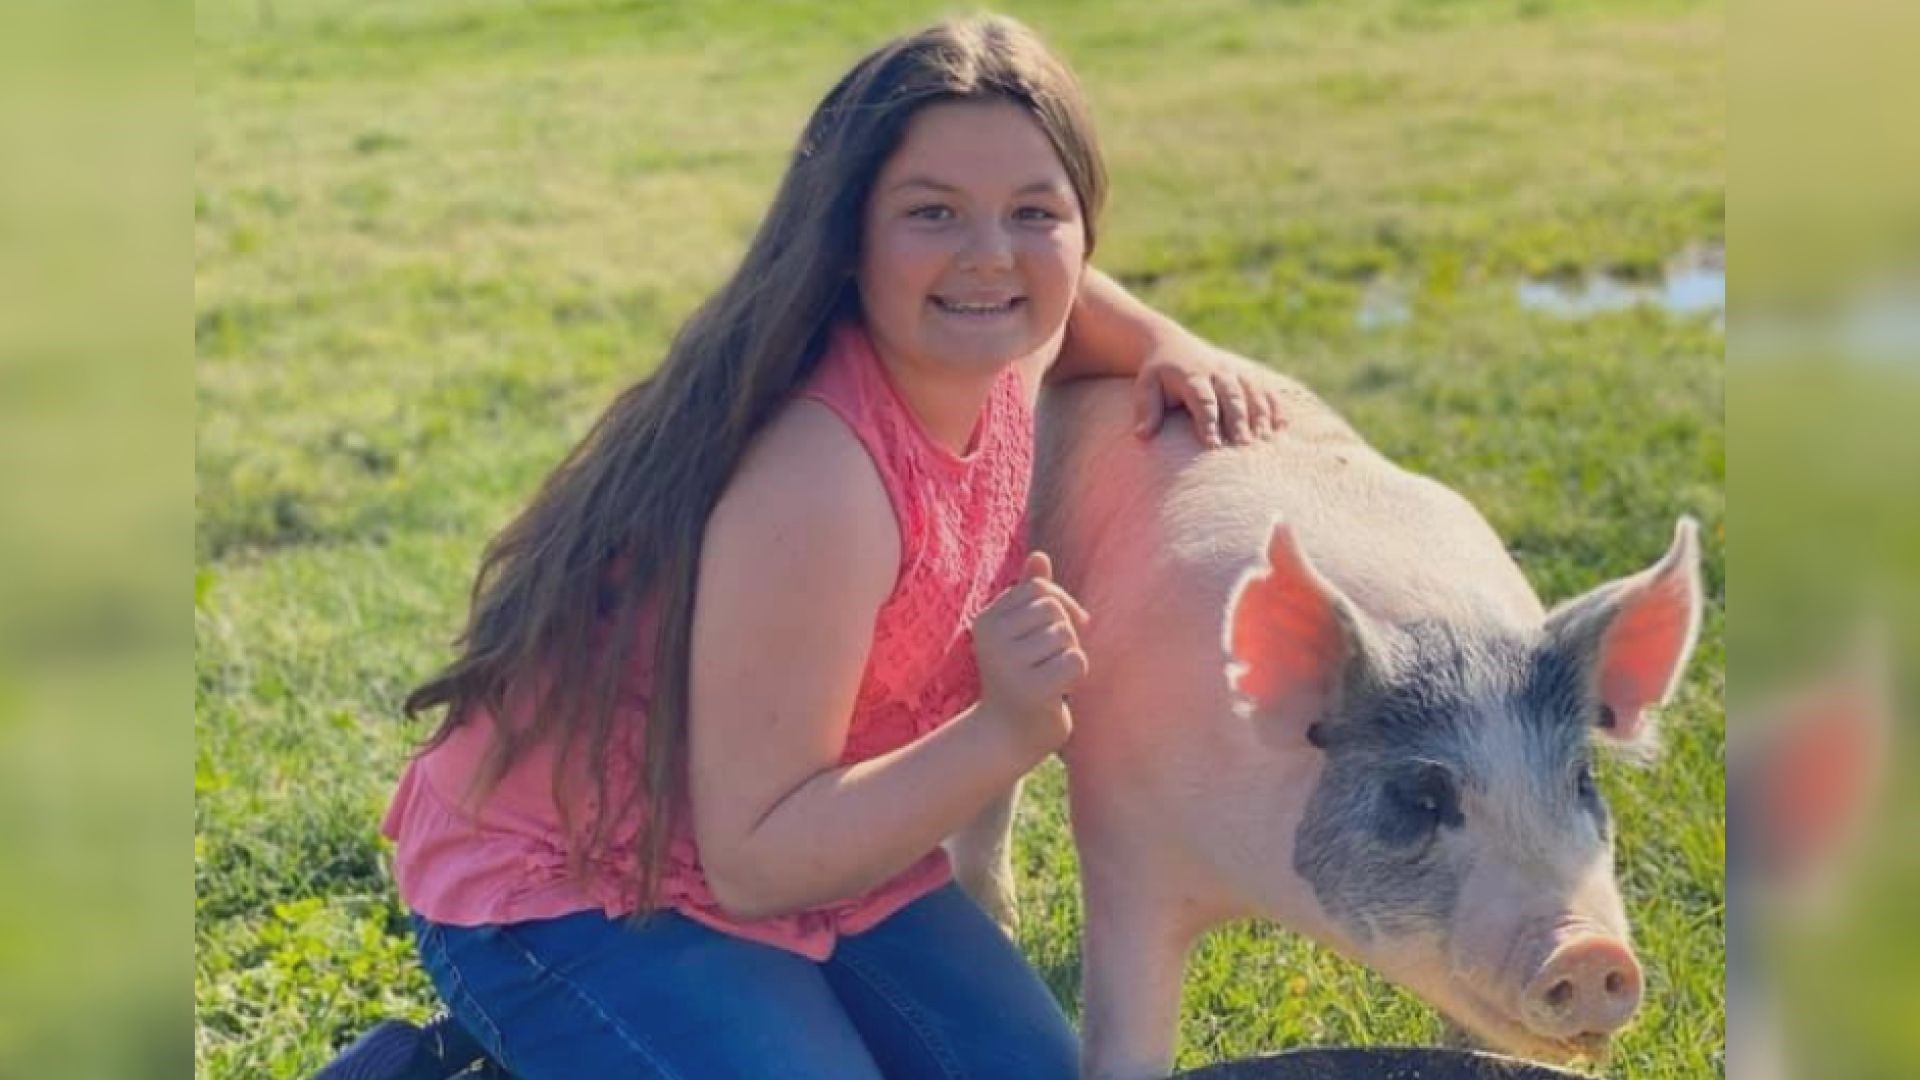 Normally, Brylinn Haley would be preparing her pig for auction at the Stanislaus County Fair but with the fair's cancellation, she now plans to donate the meat.